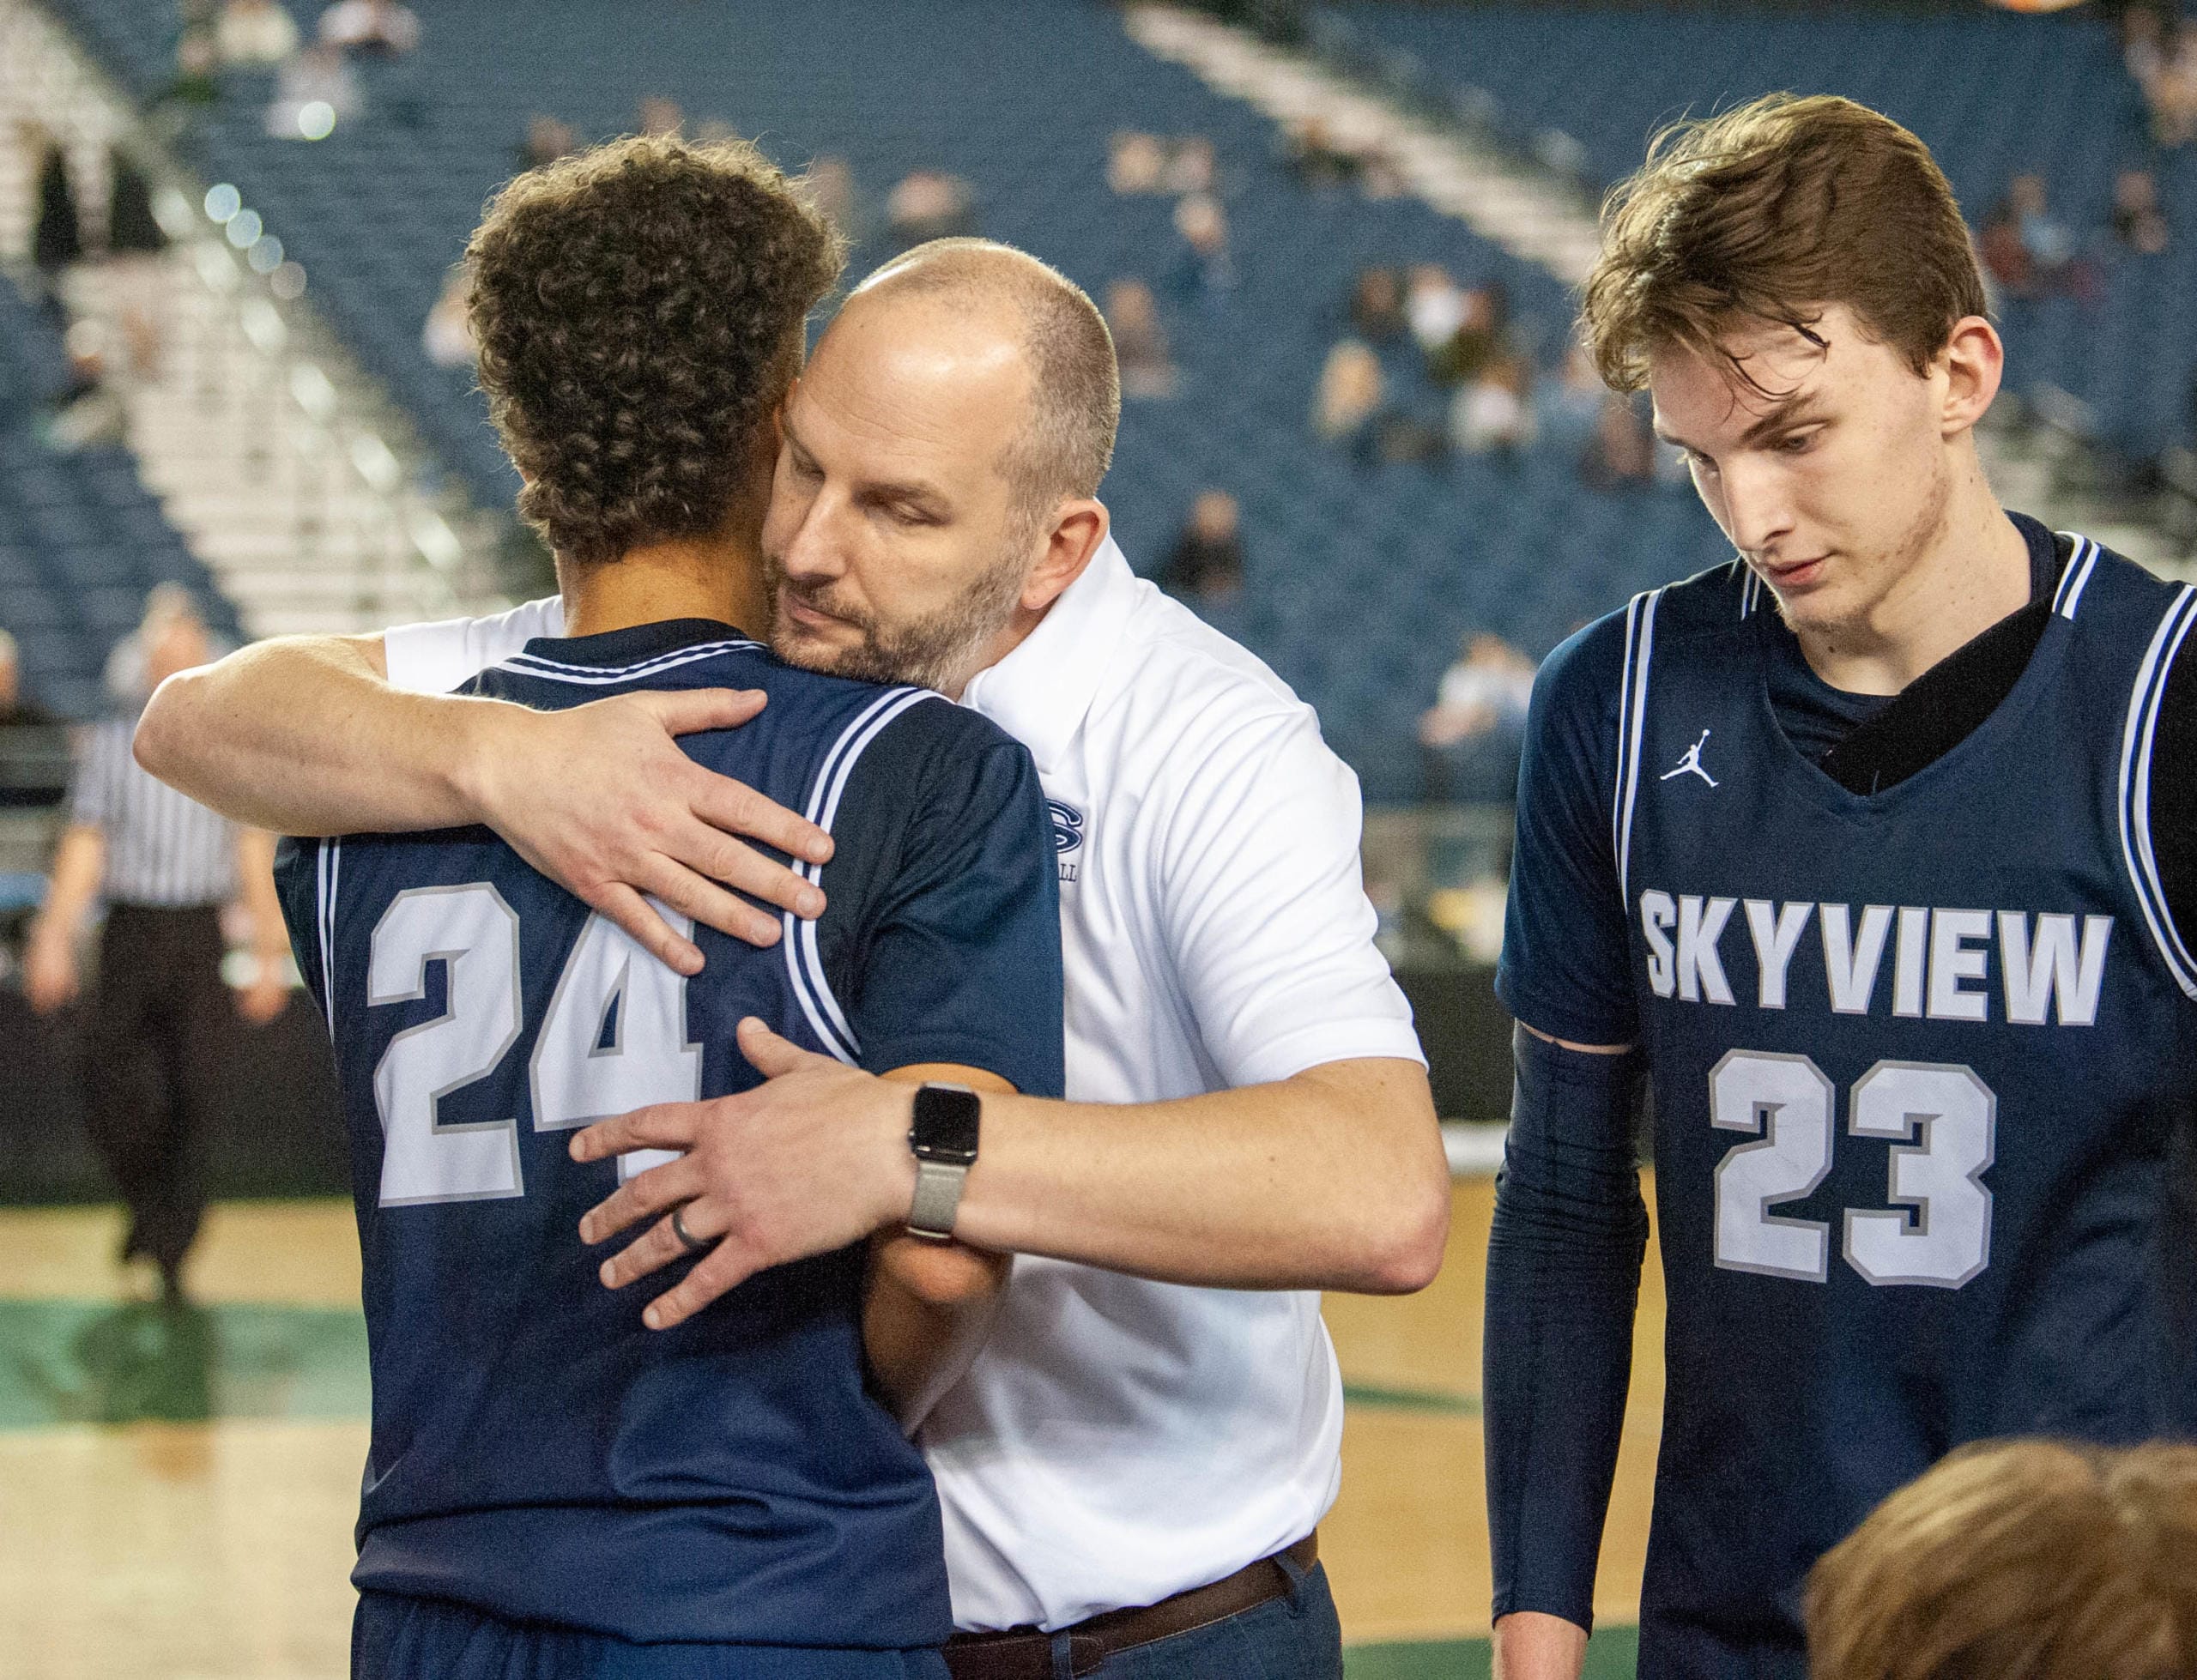 Skyview's Jace Chatman receives a hug from coach Matt Gruhler in a 4A State consolation game Friday at the Tacoma Dome. Skyview lost 75-55 to Olympia to end its season.